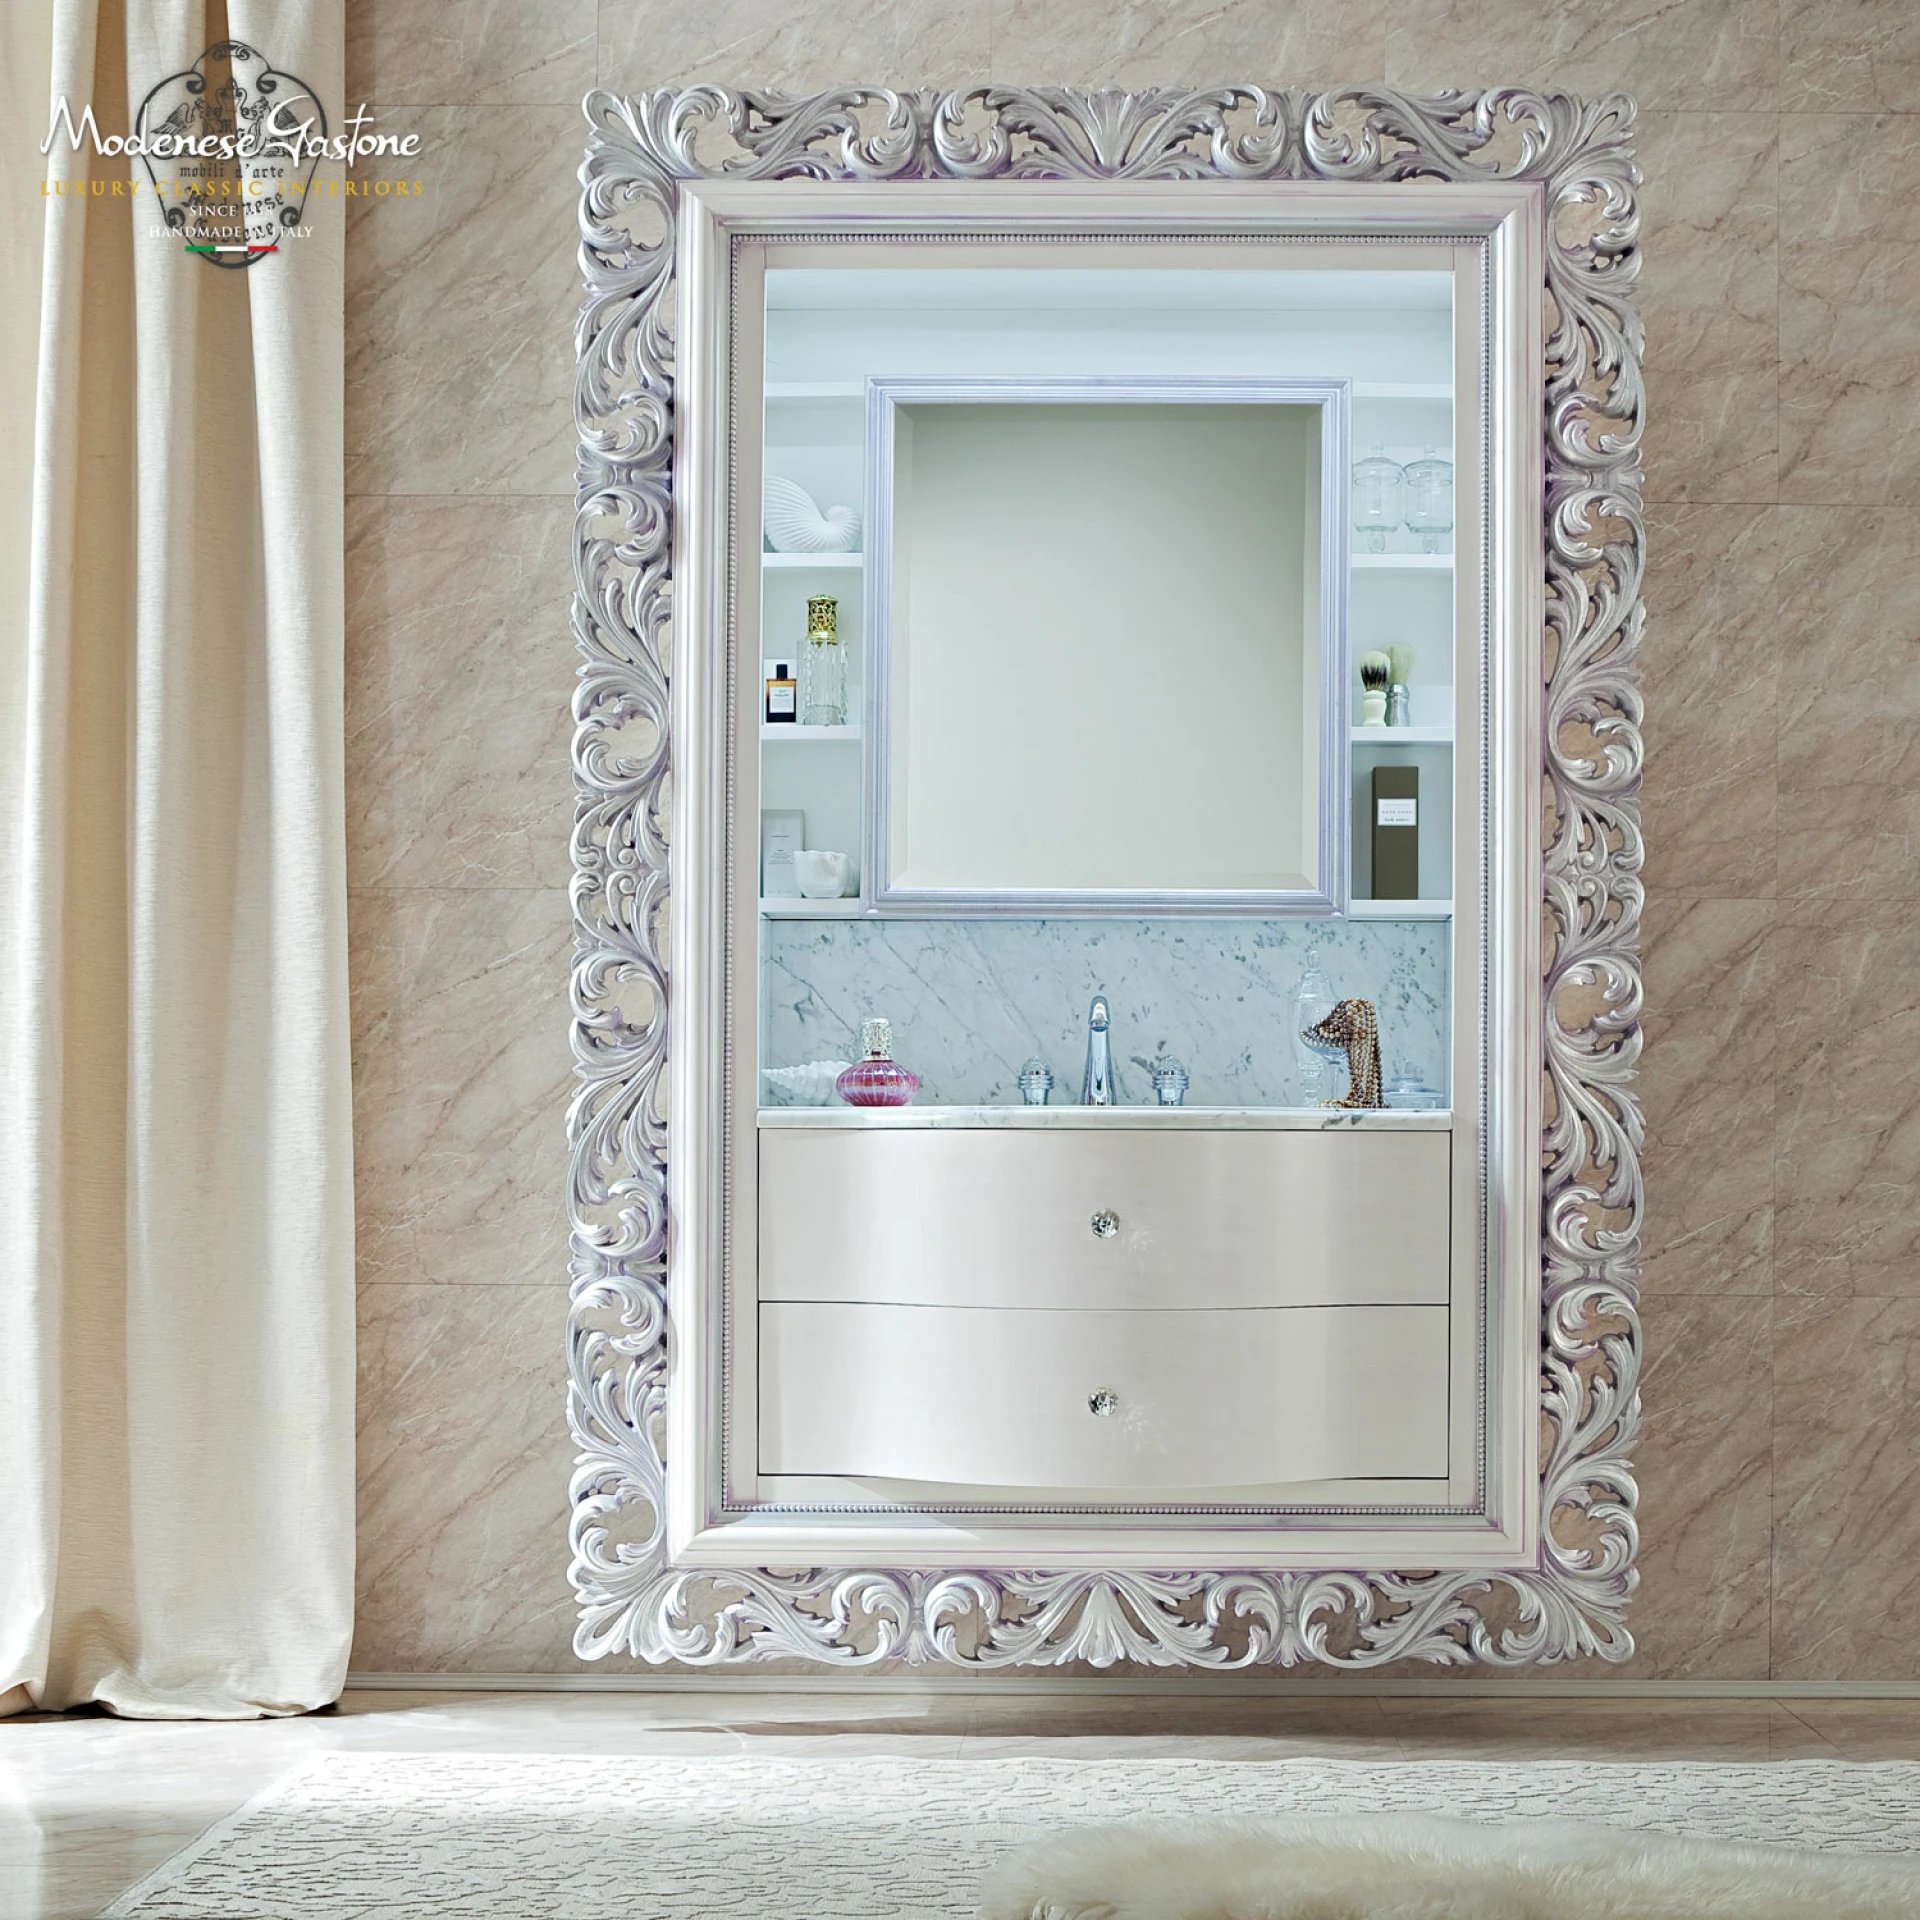 Silver leaf wood carved mirror and white laquered bathroom sink cabinet by Modenese Bathroom Furniture